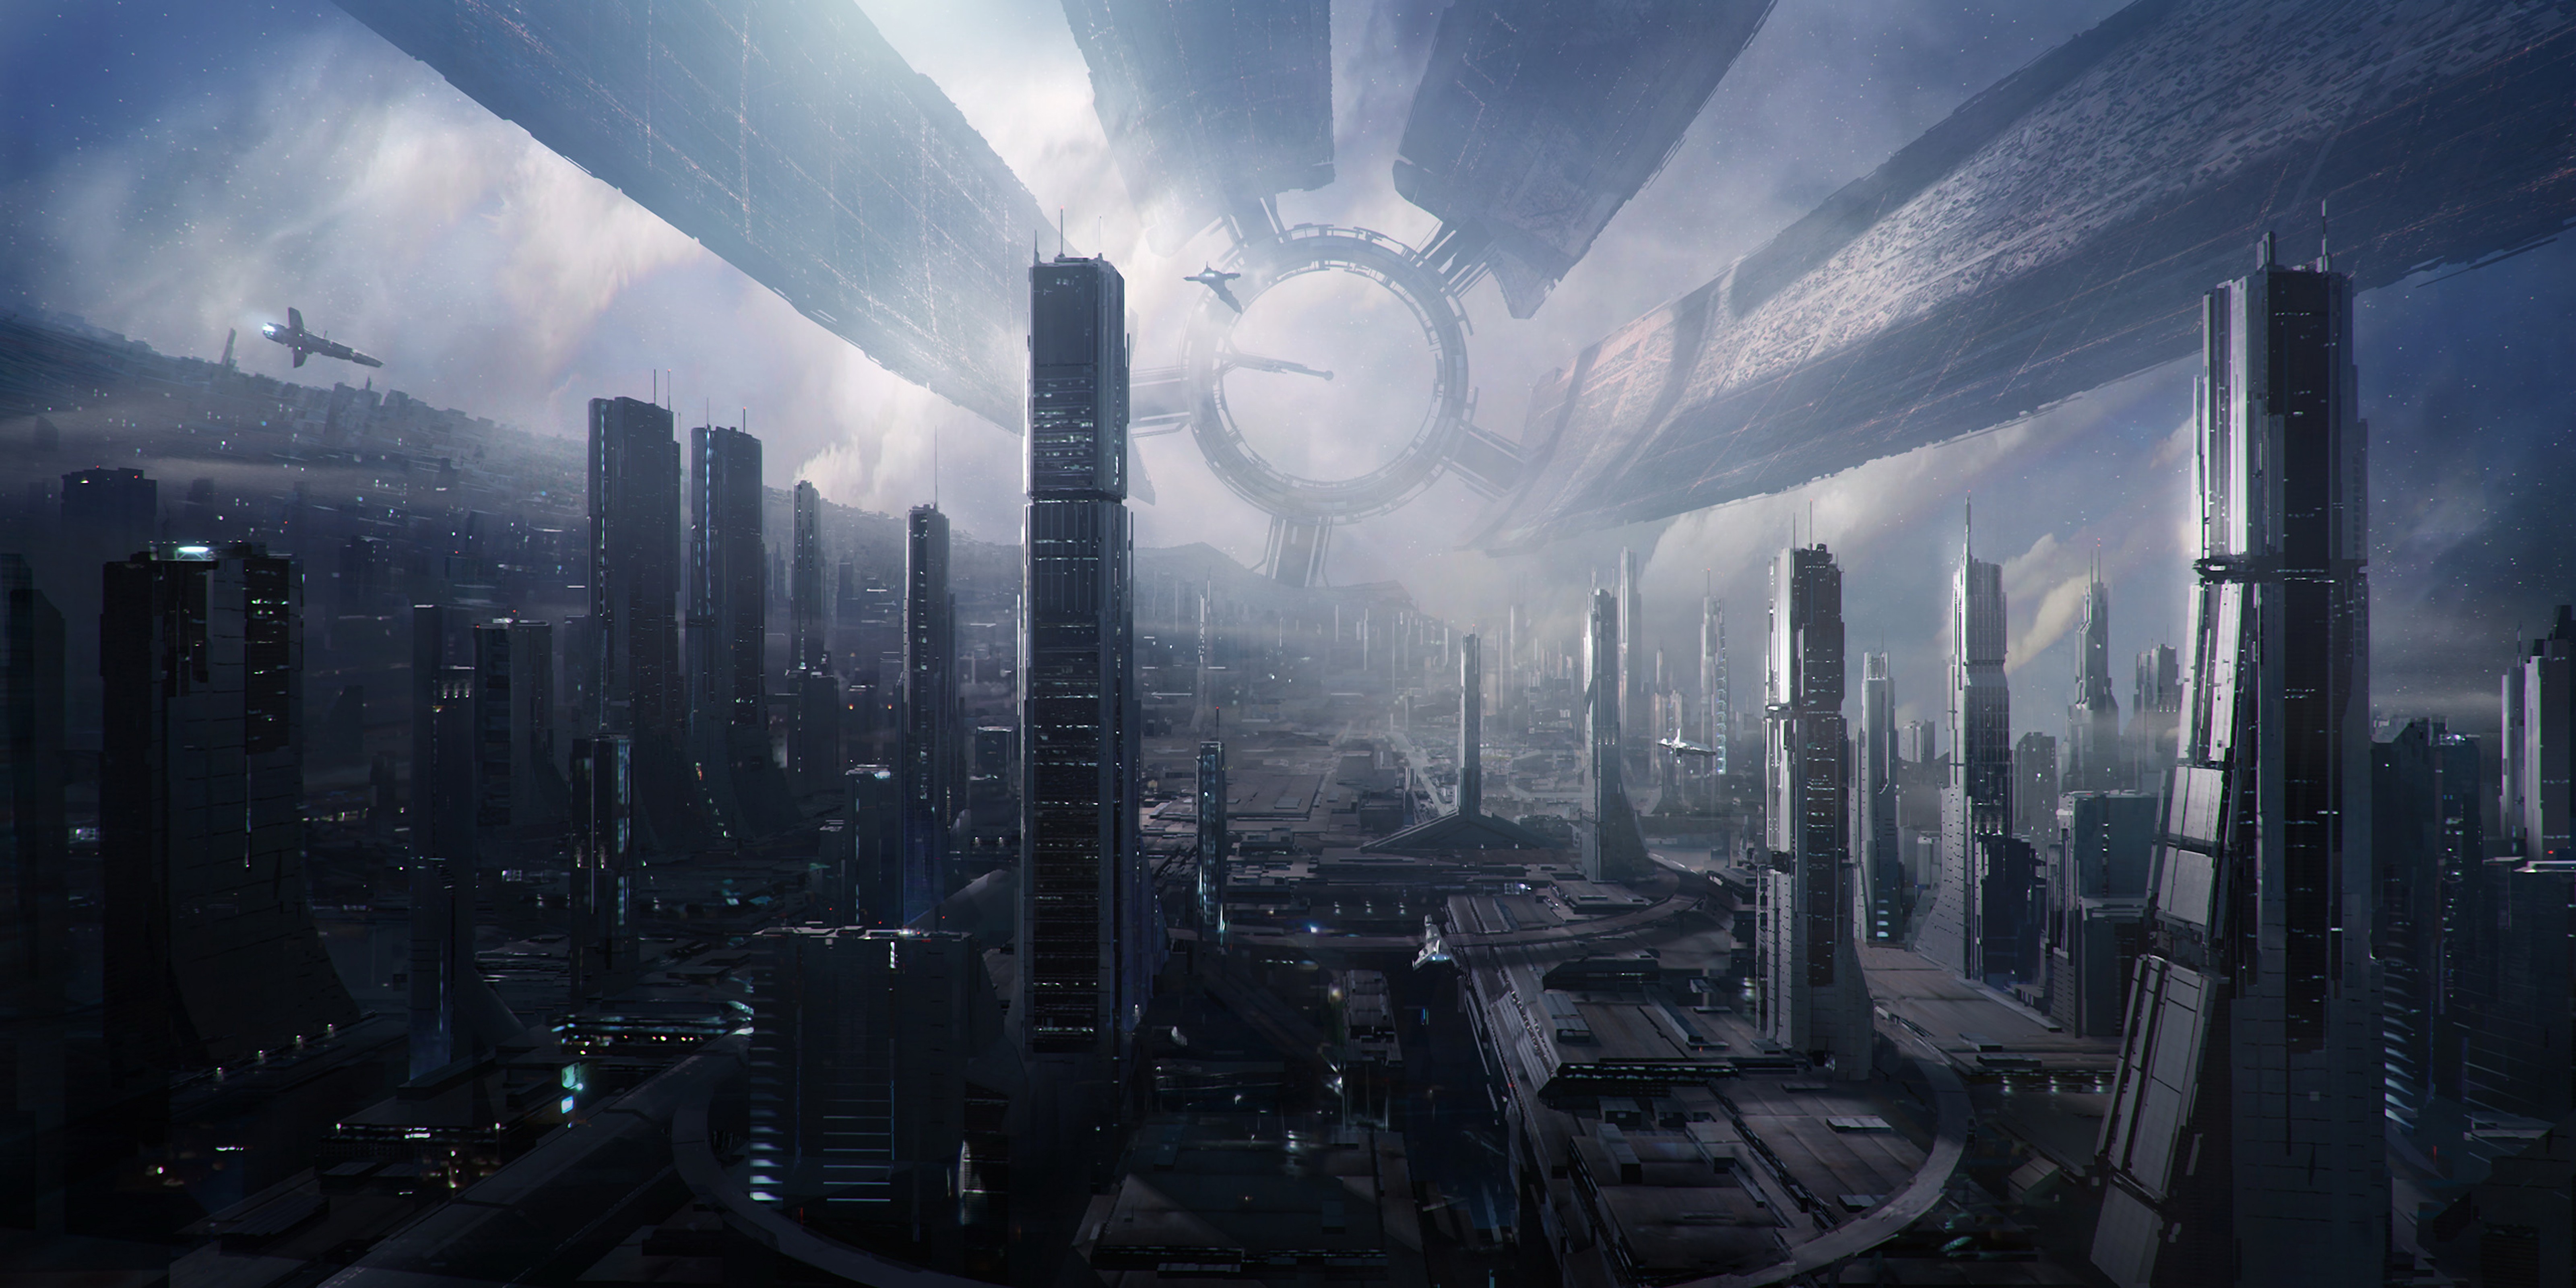 Mass Effect 2 Citadel: Futuristic cityscape with a spaceship hovering above buildings - 4K desktop wallpaper.